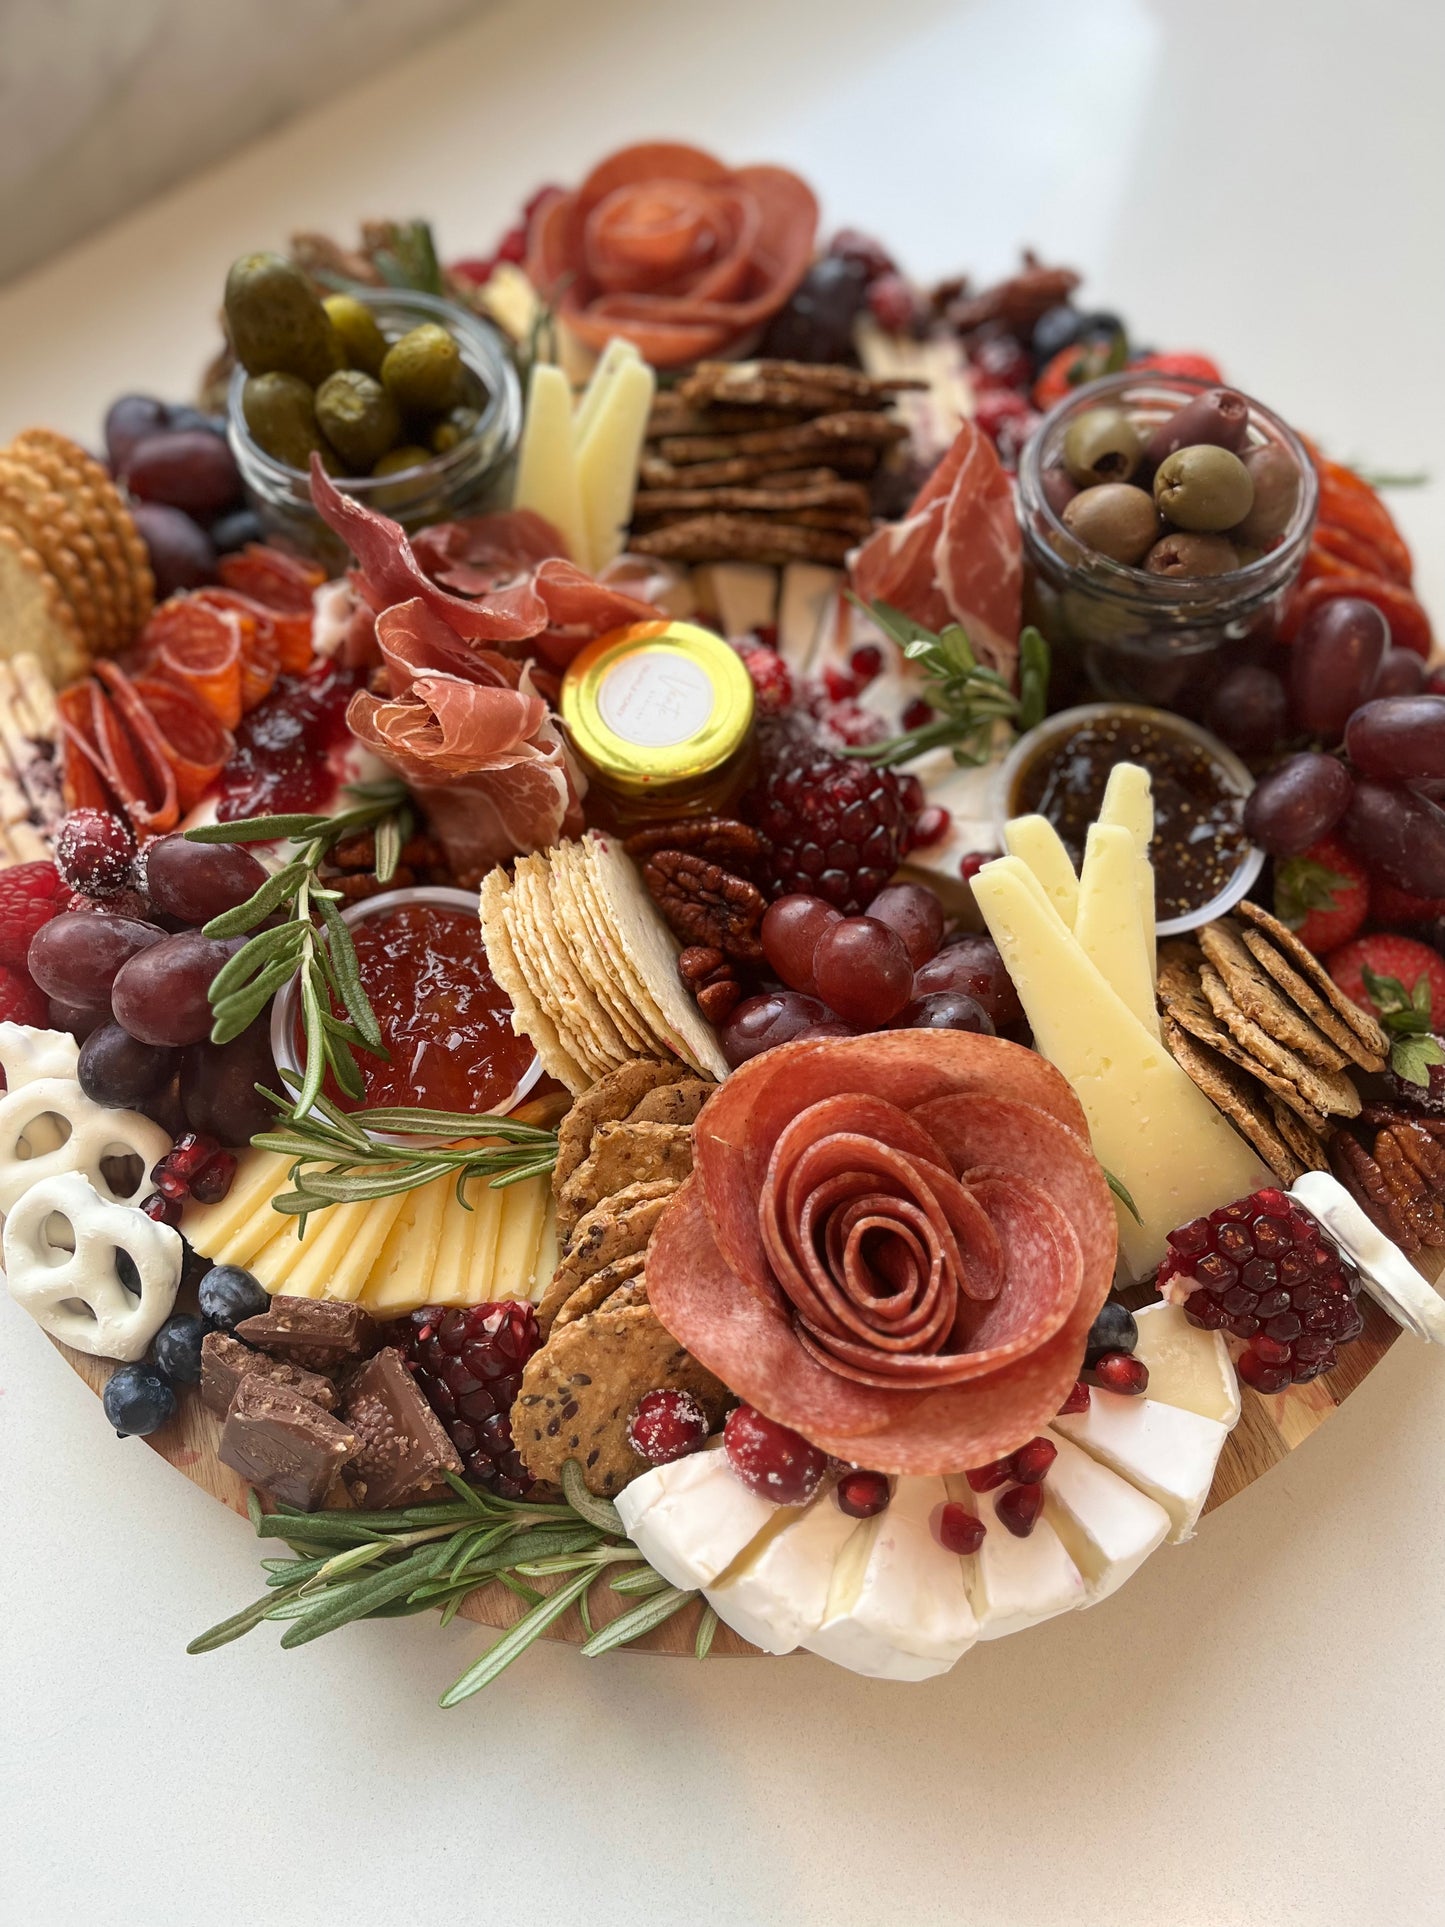 Seasonal Nibbles Charcuterie Board - Round Bee Board (15.5 inches)